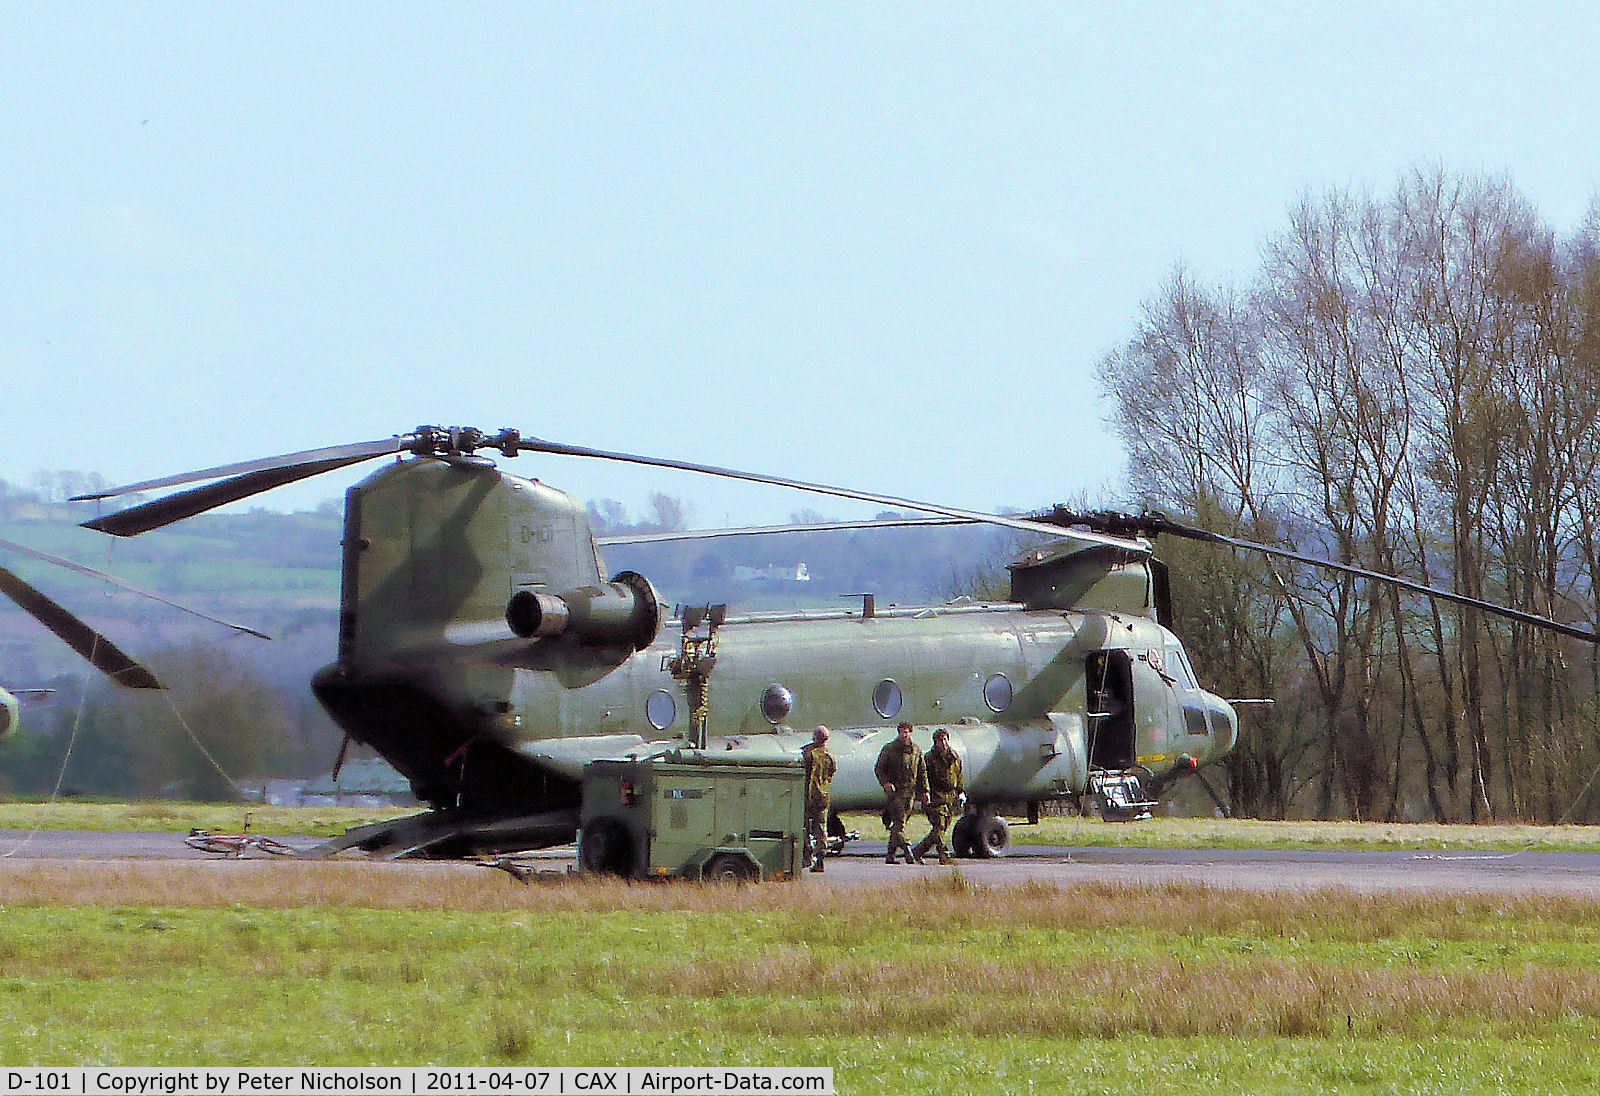 D-101, Boeing CH-47D Chinook C/N M.4101, CH-47D Chinook of 298 Squadron Royal Netherlands Air Force as seen at Carlisle in April 2011.